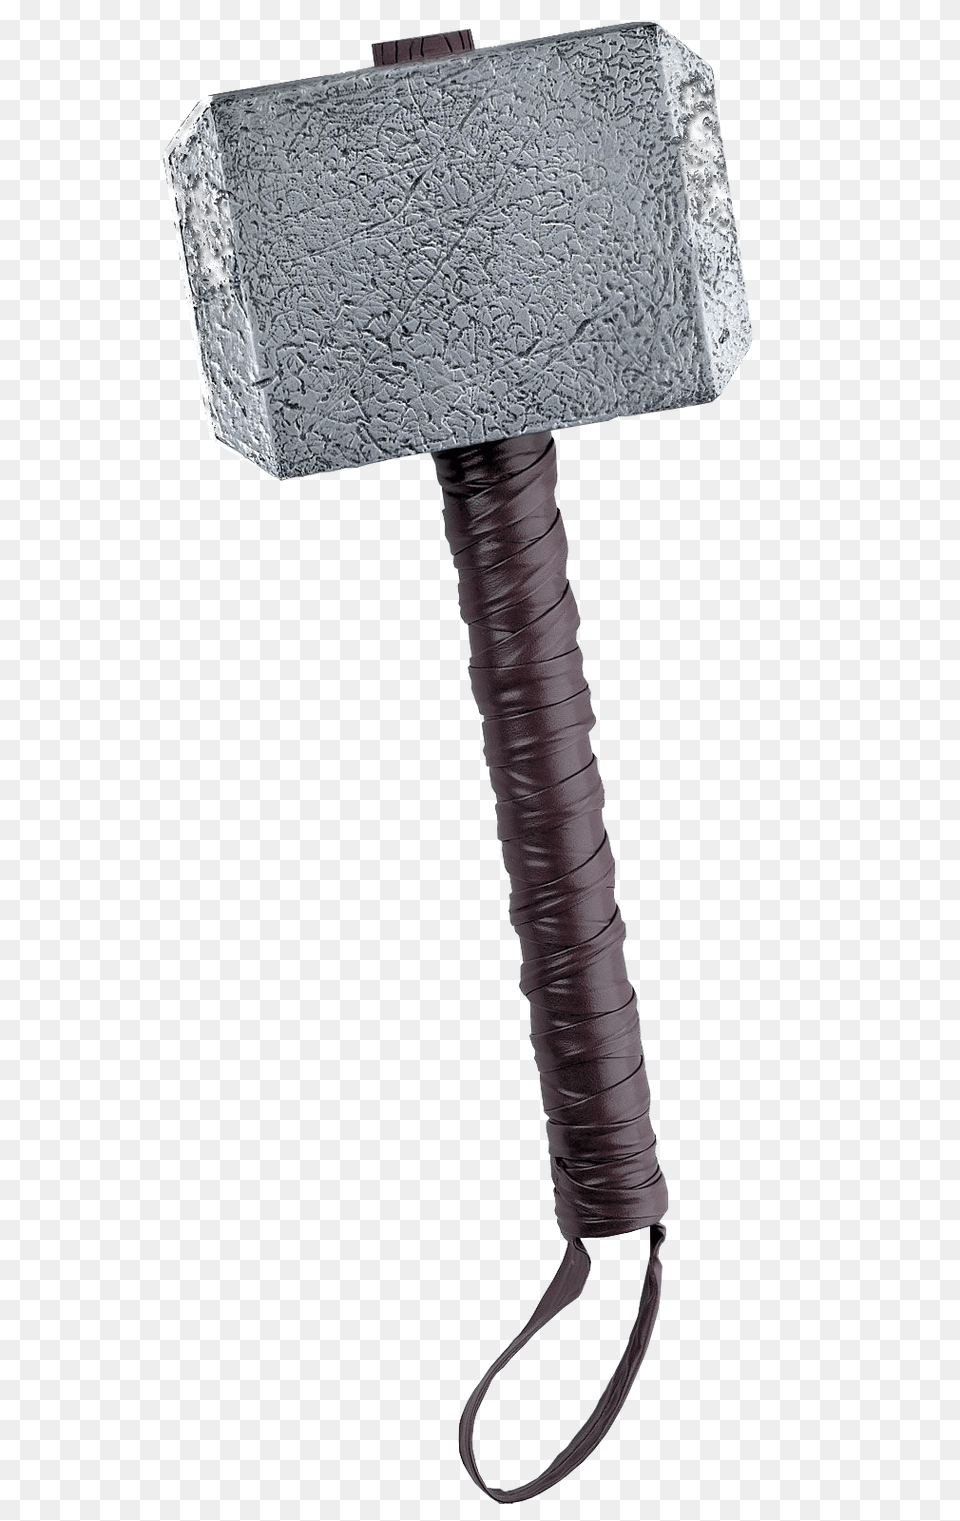 Muscle Mass To God Like Proportions Hammer Of Thor, Device, Tool, Mallet Png